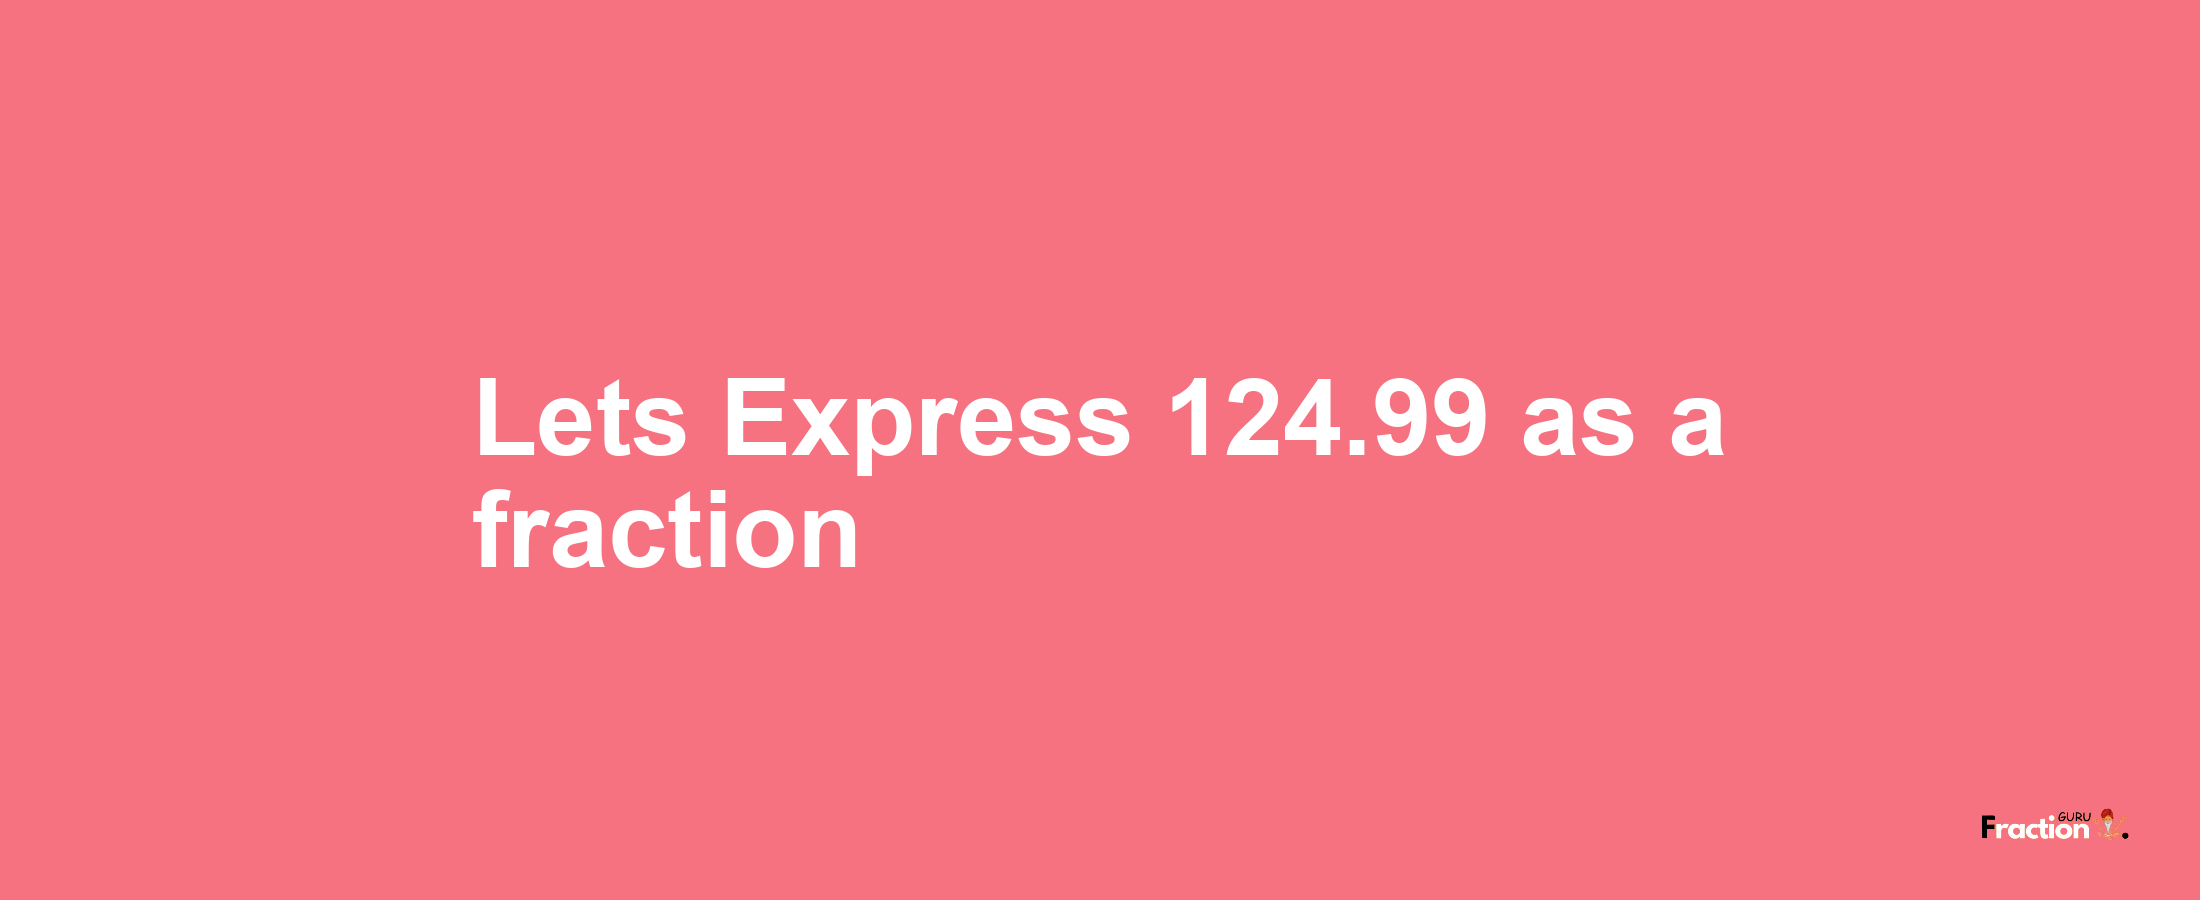 Lets Express 124.99 as afraction